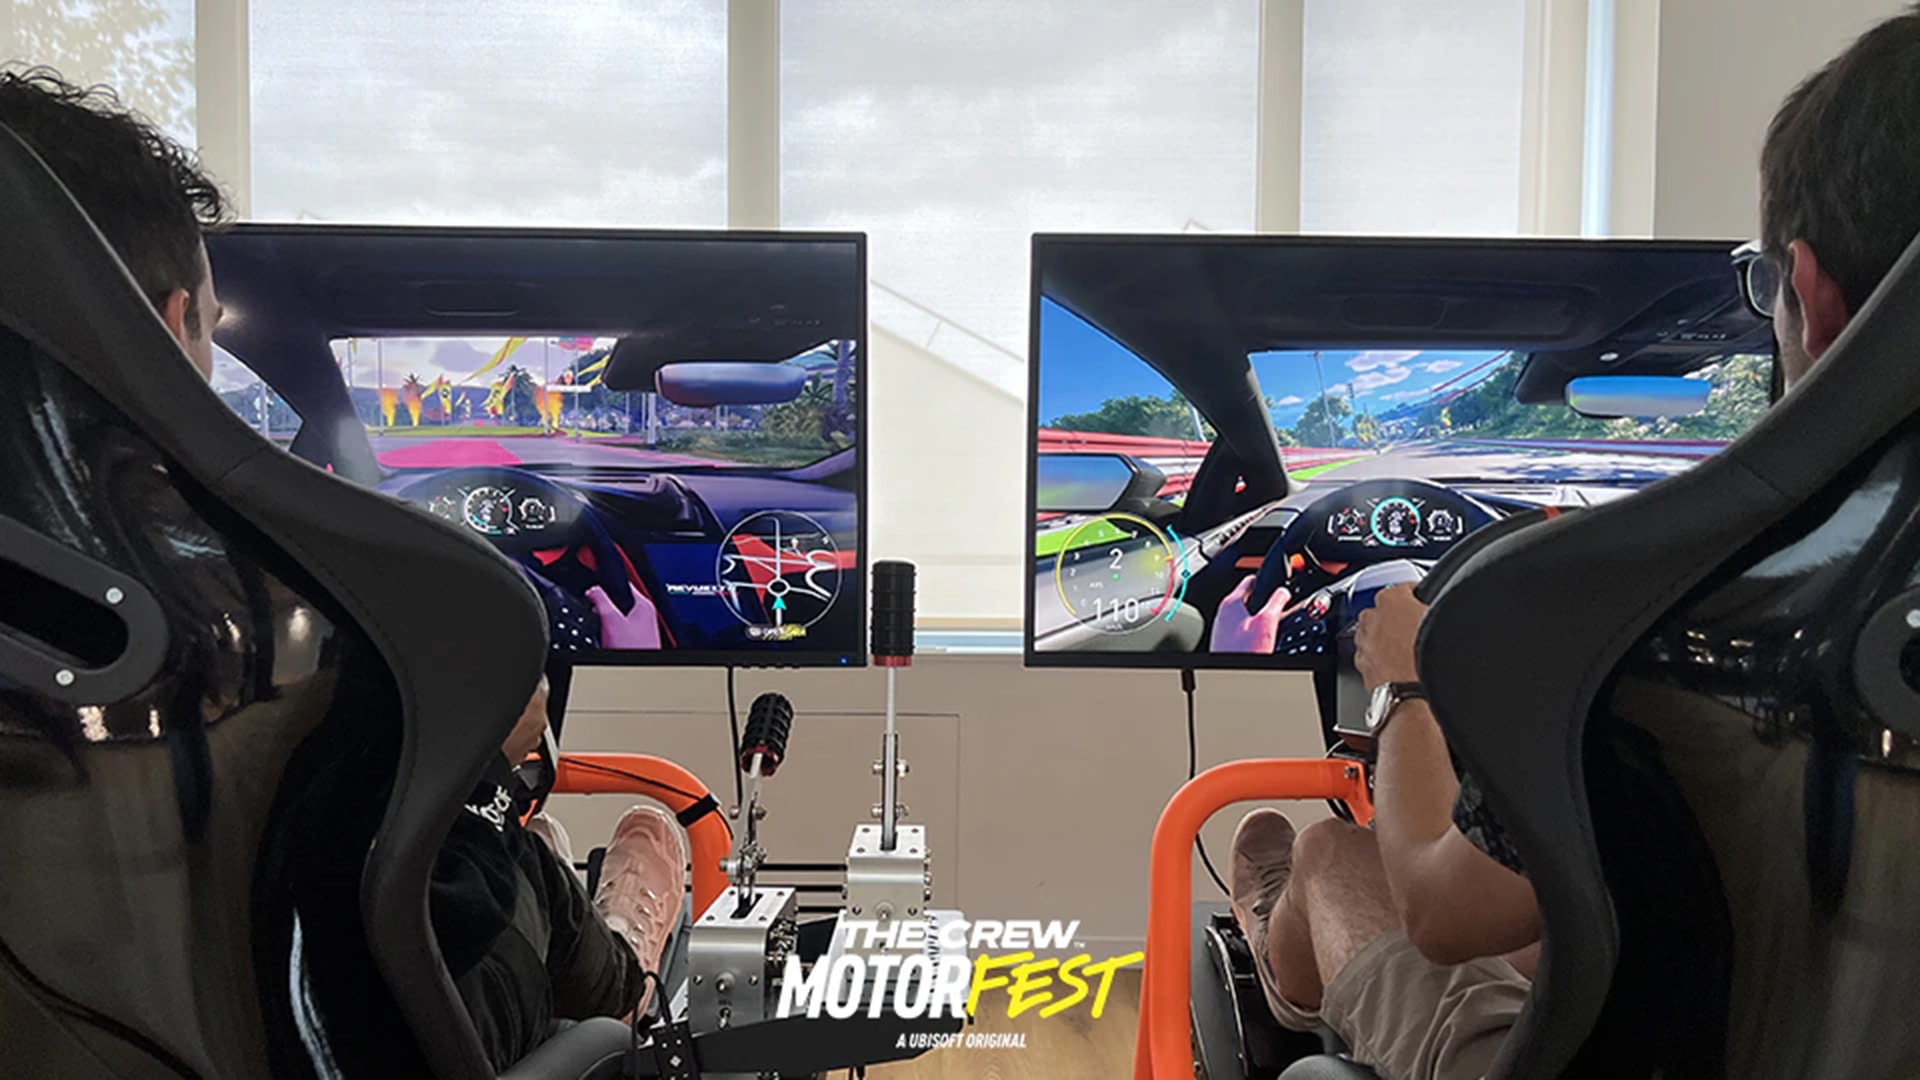 Does Your Steering Wheel Work With the Crew Motorfest? - autoevolution